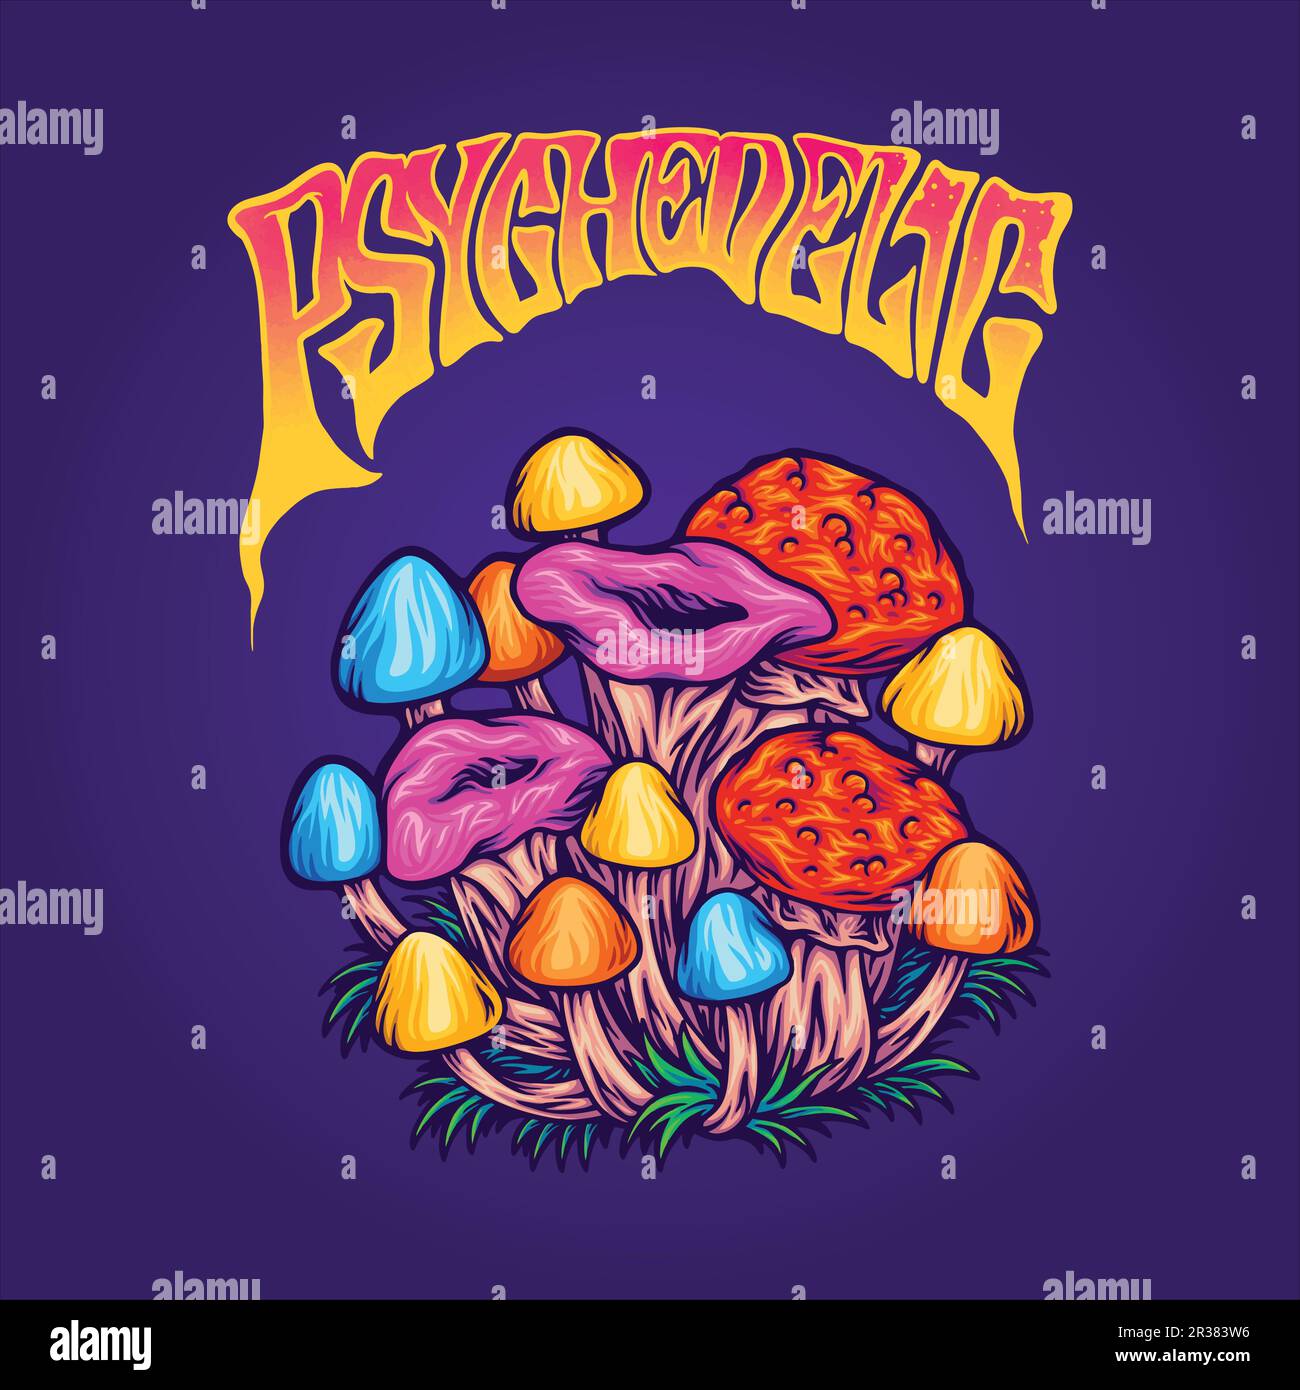 Psychedelic mushroom edible hallucinogenic spores family illustrations vector illustrations for your work logo, merchandise t-shirt, stickers and labe Stock Vector